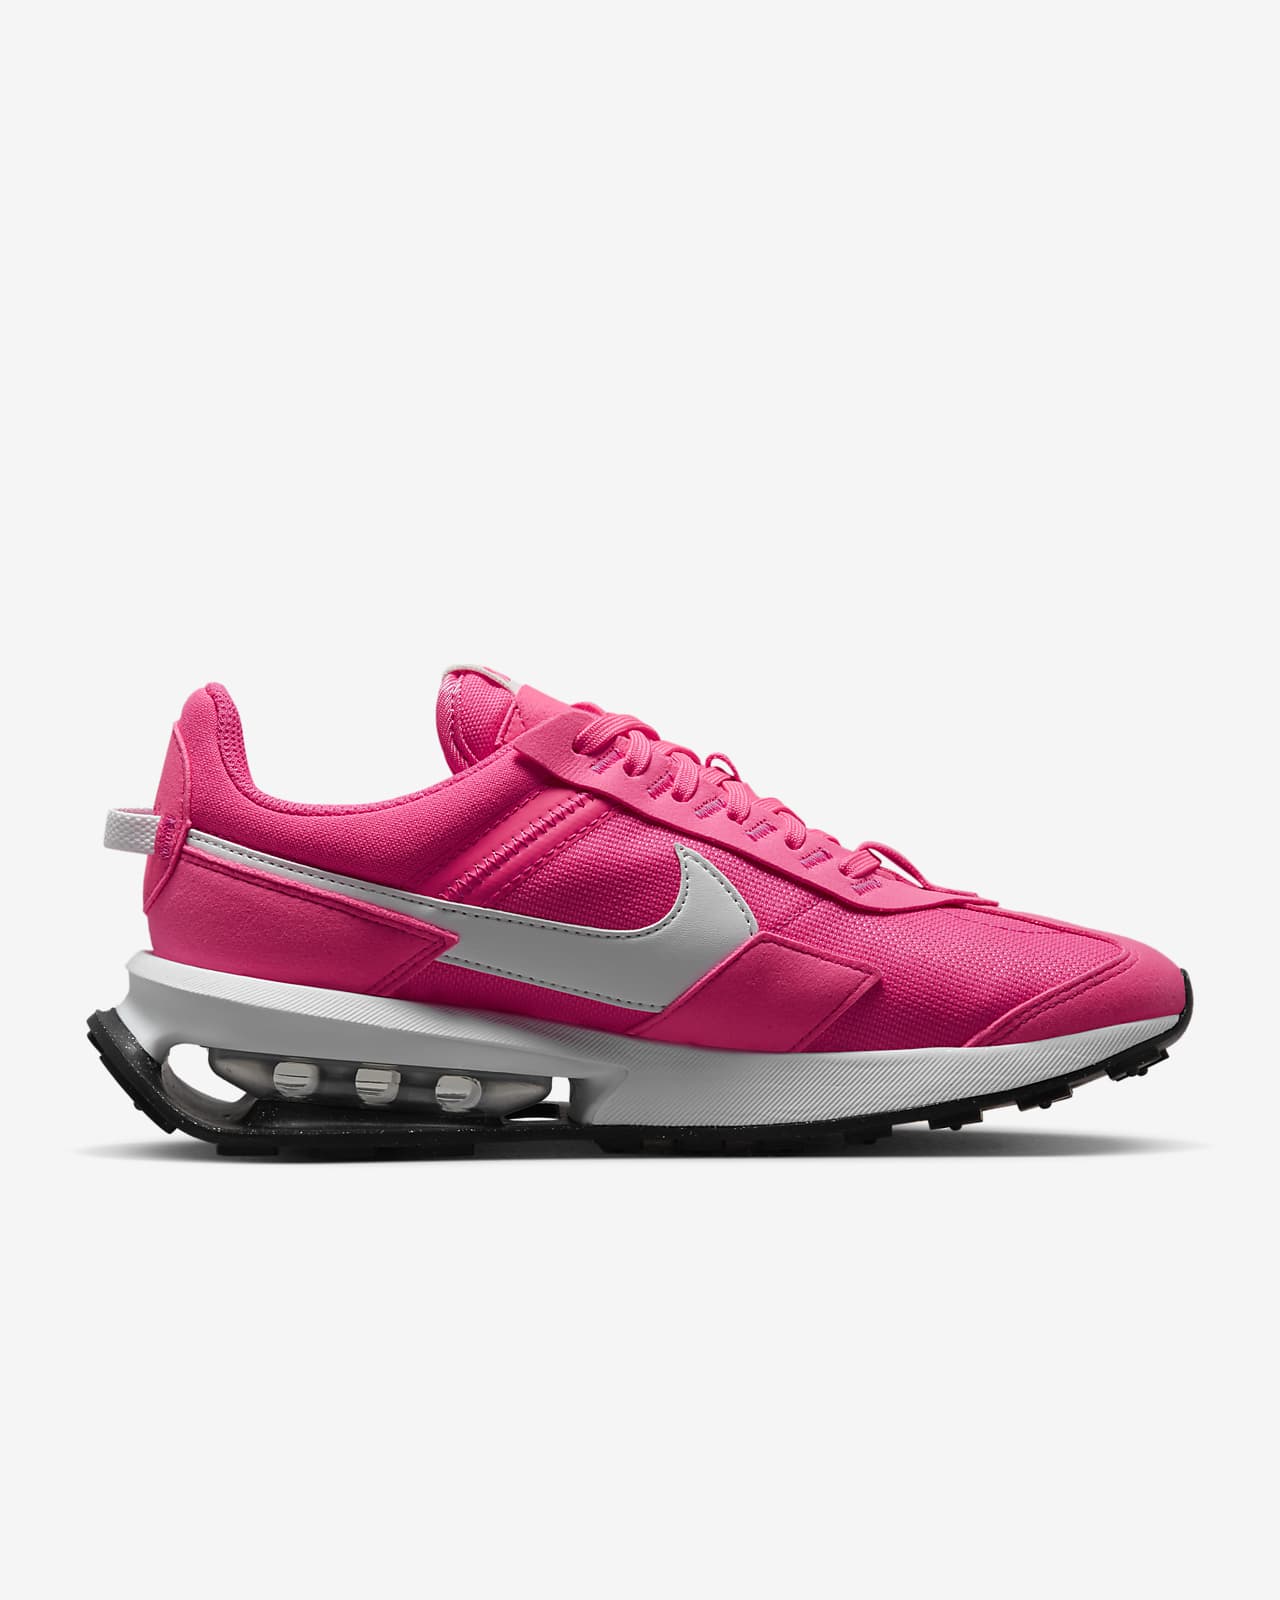 Evaporate Whitney distort Nike Air Max Pre-Day Women's Shoes. Nike.com